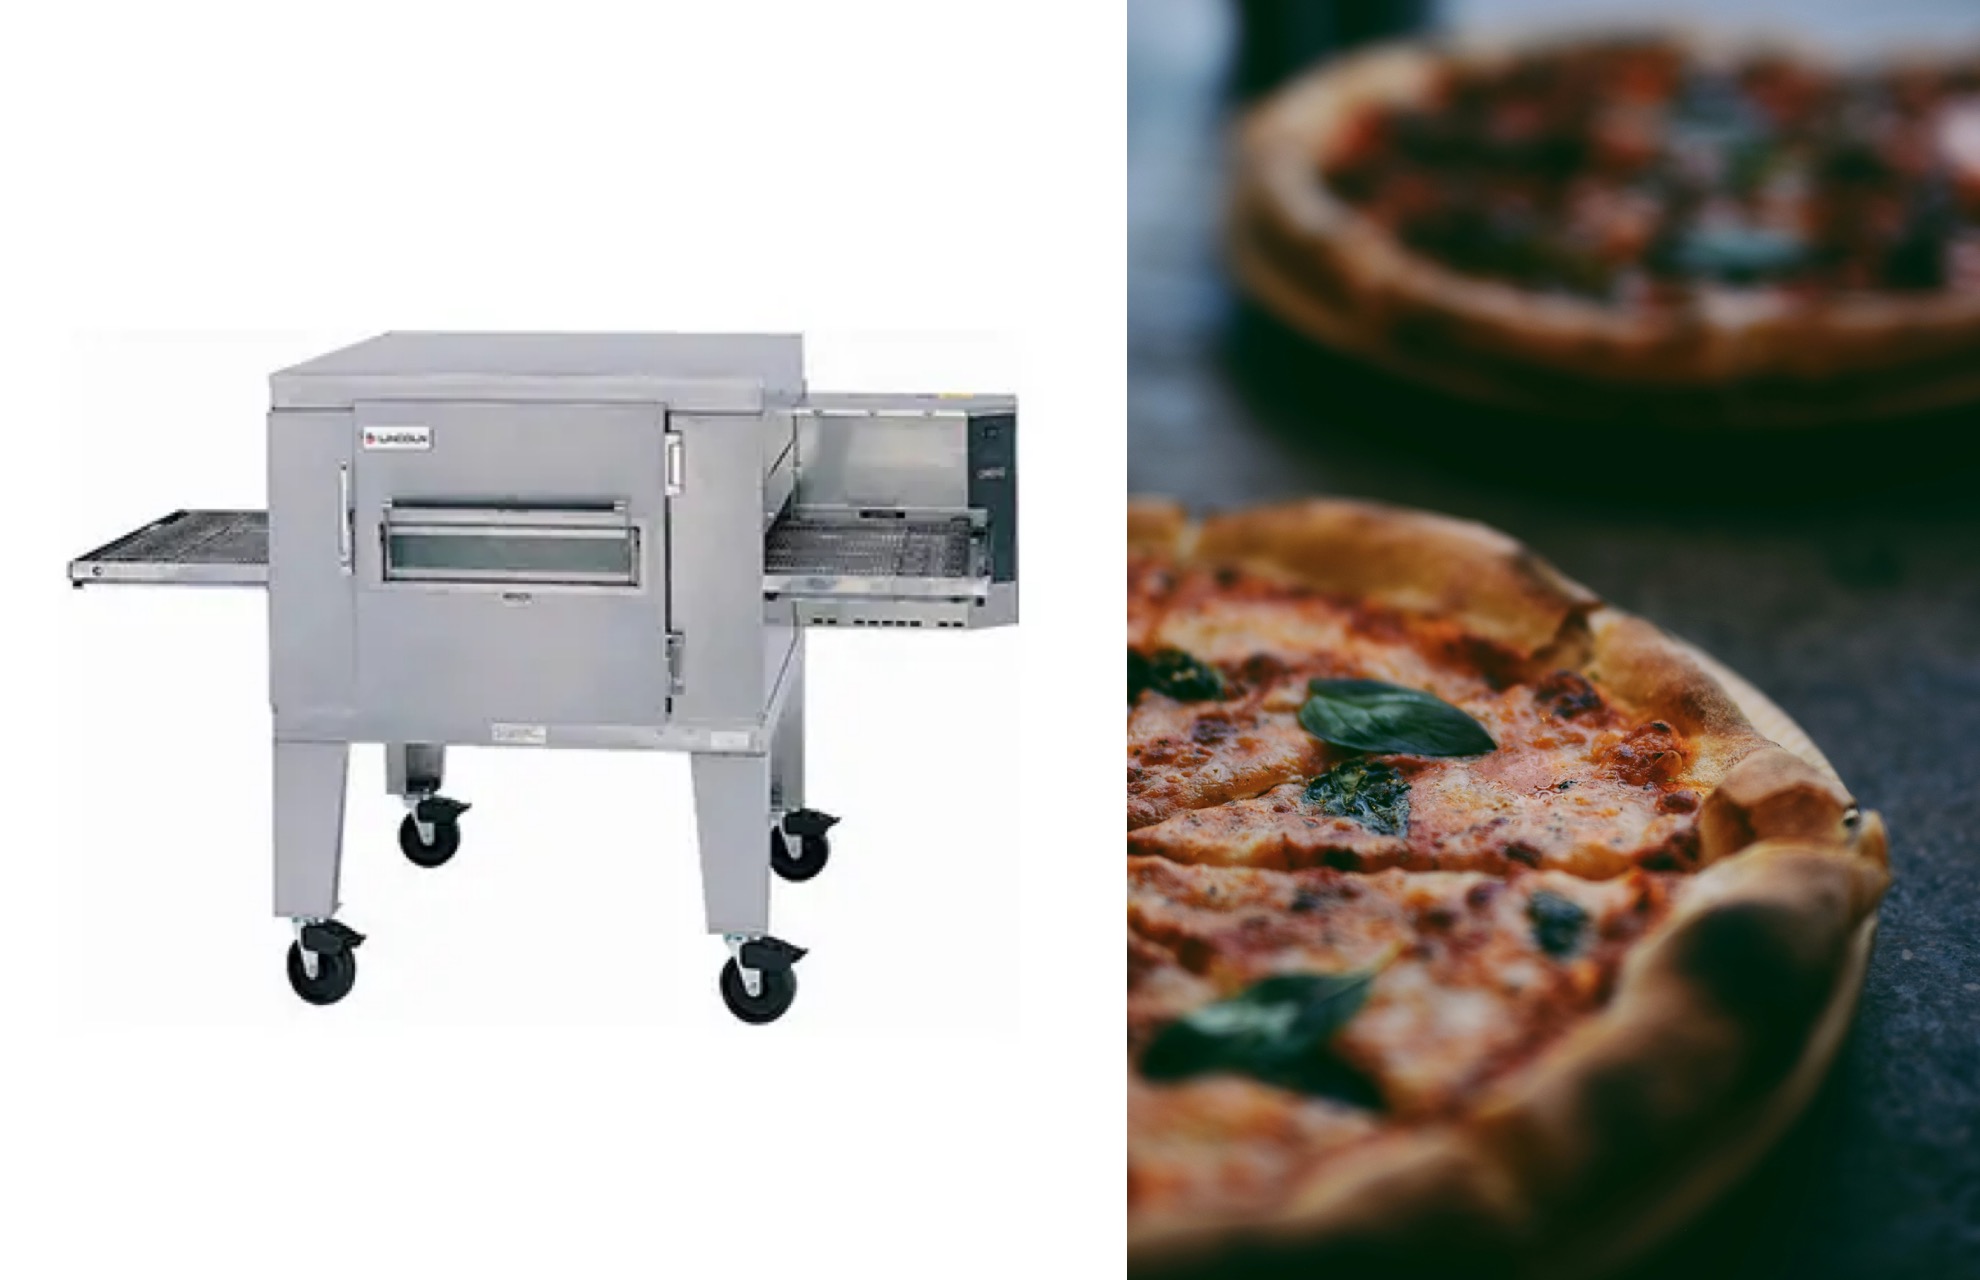 https://www.sydneycommercialkitchens.com.au/sck-blog/lincoln-impinger-conveyor-pizza-oventhe-key-to-pizza-perfection